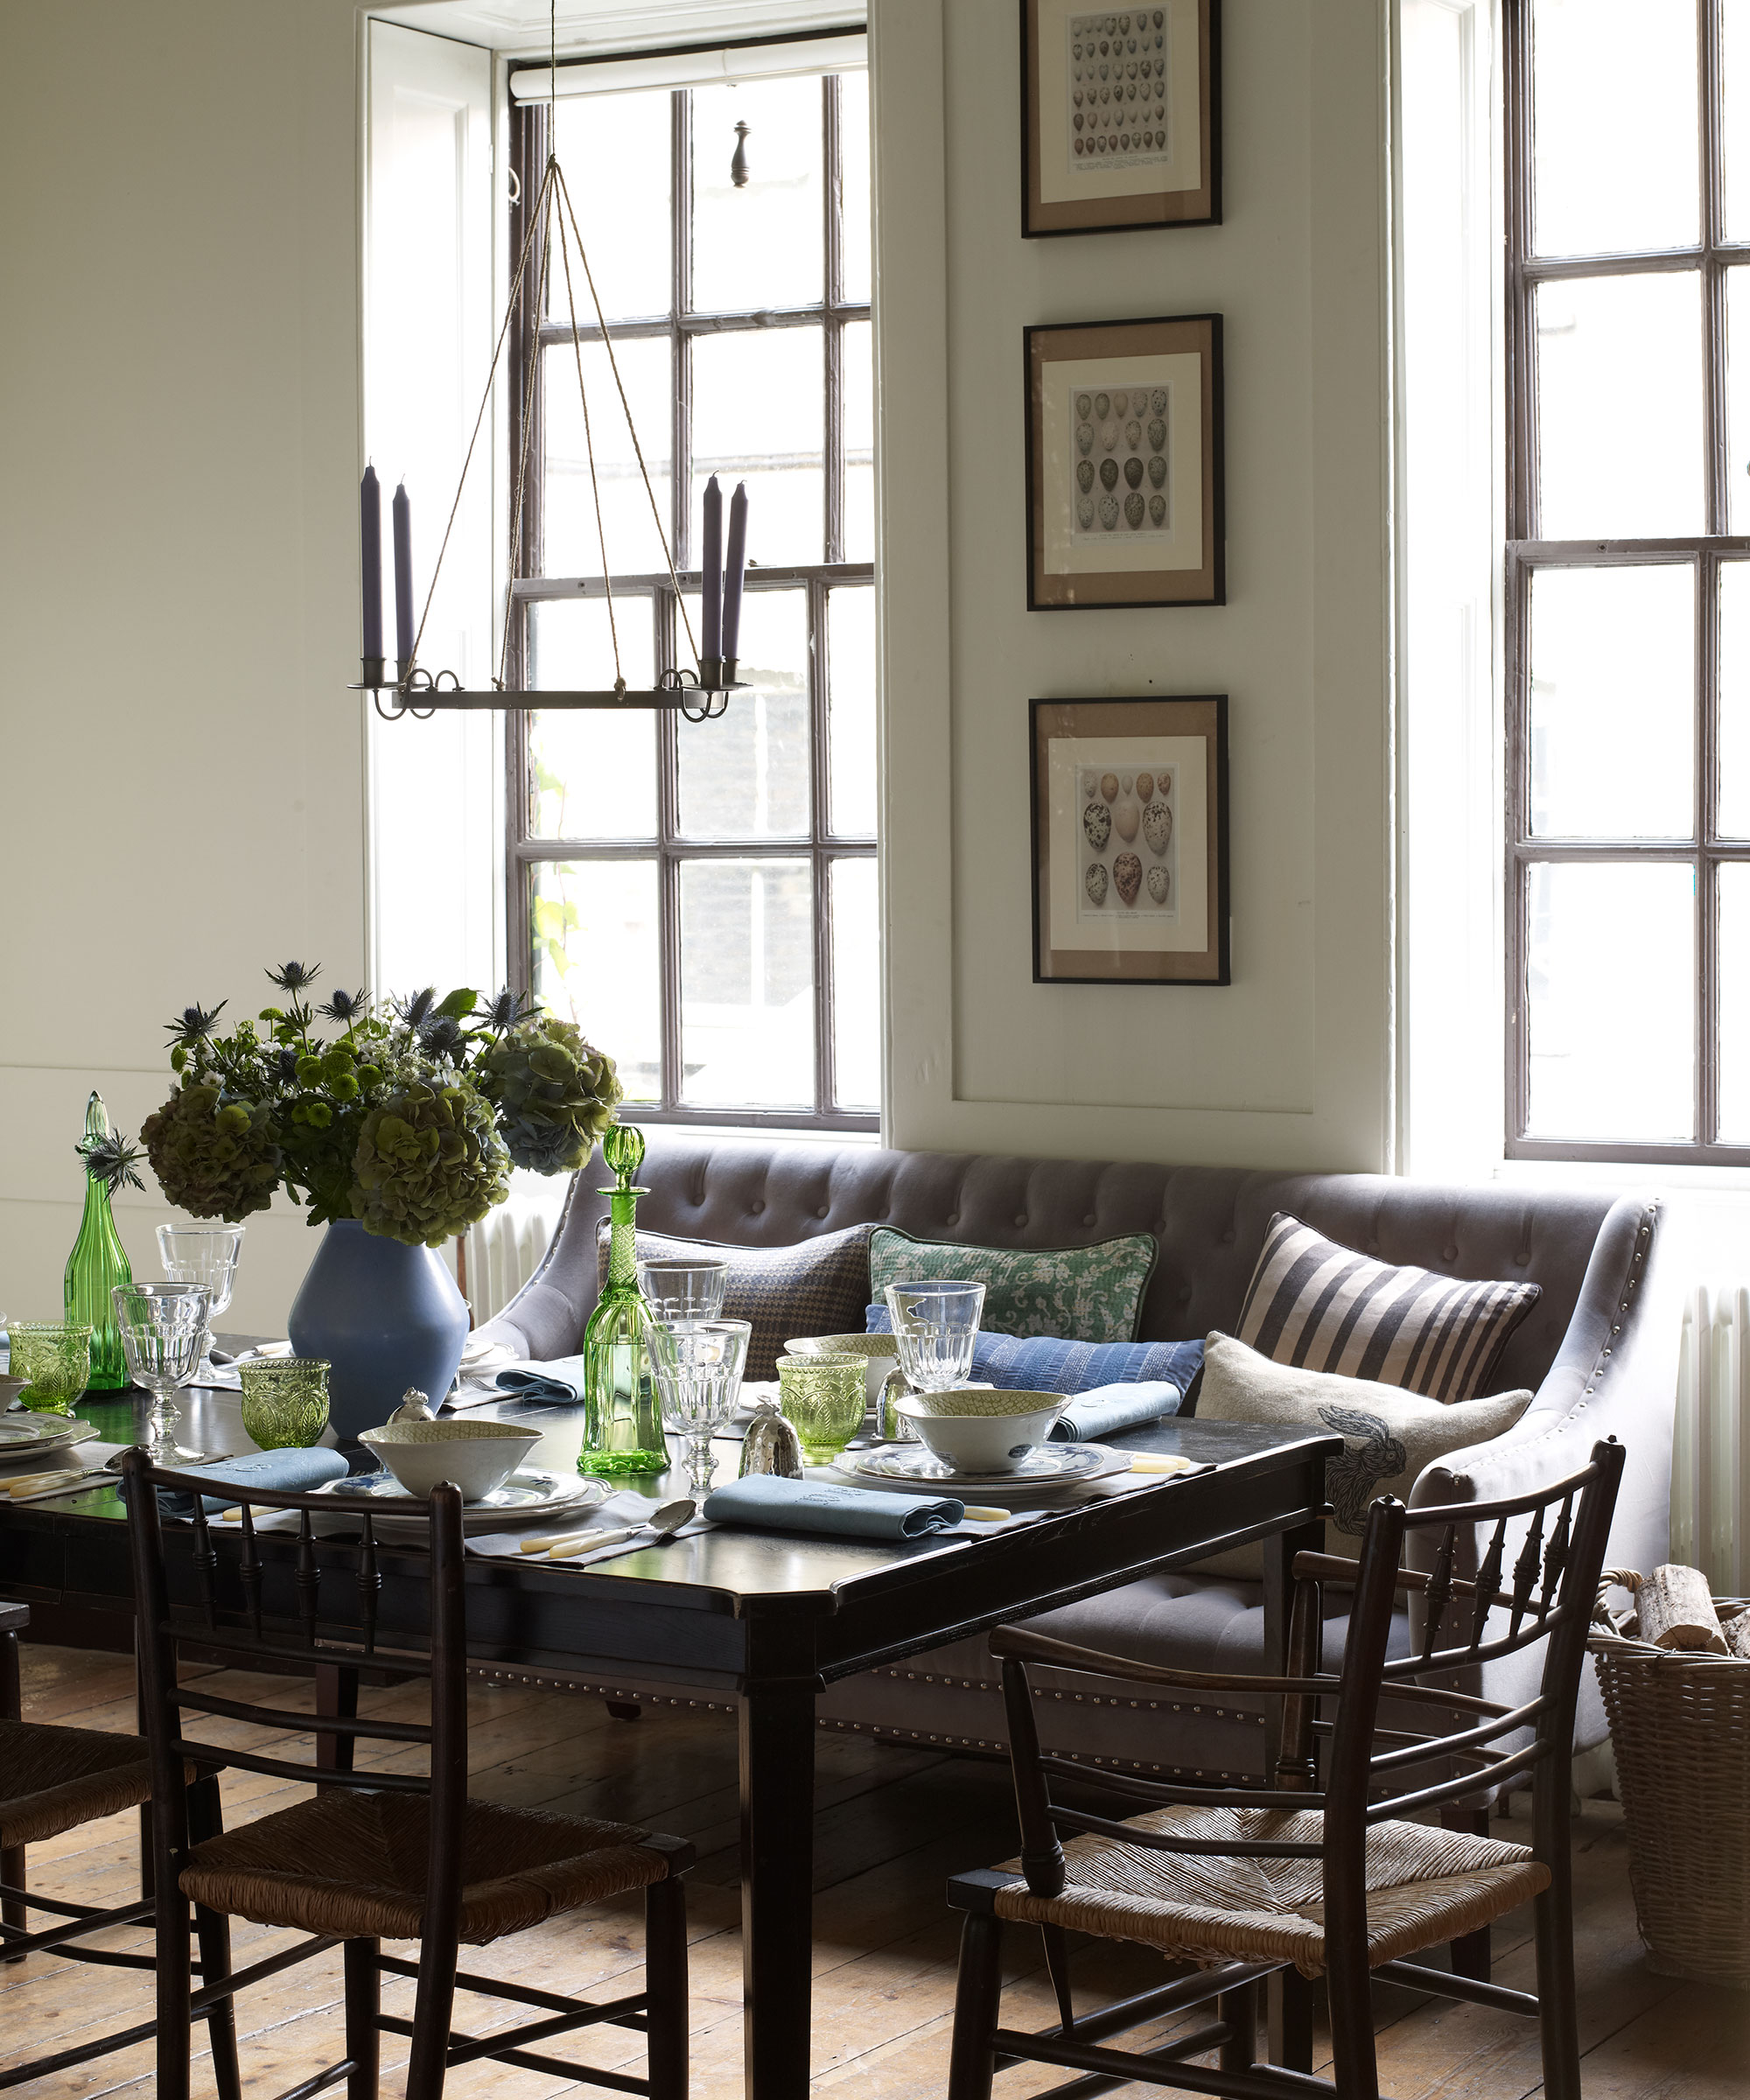 How To Decorate Dining Room Table With Runner